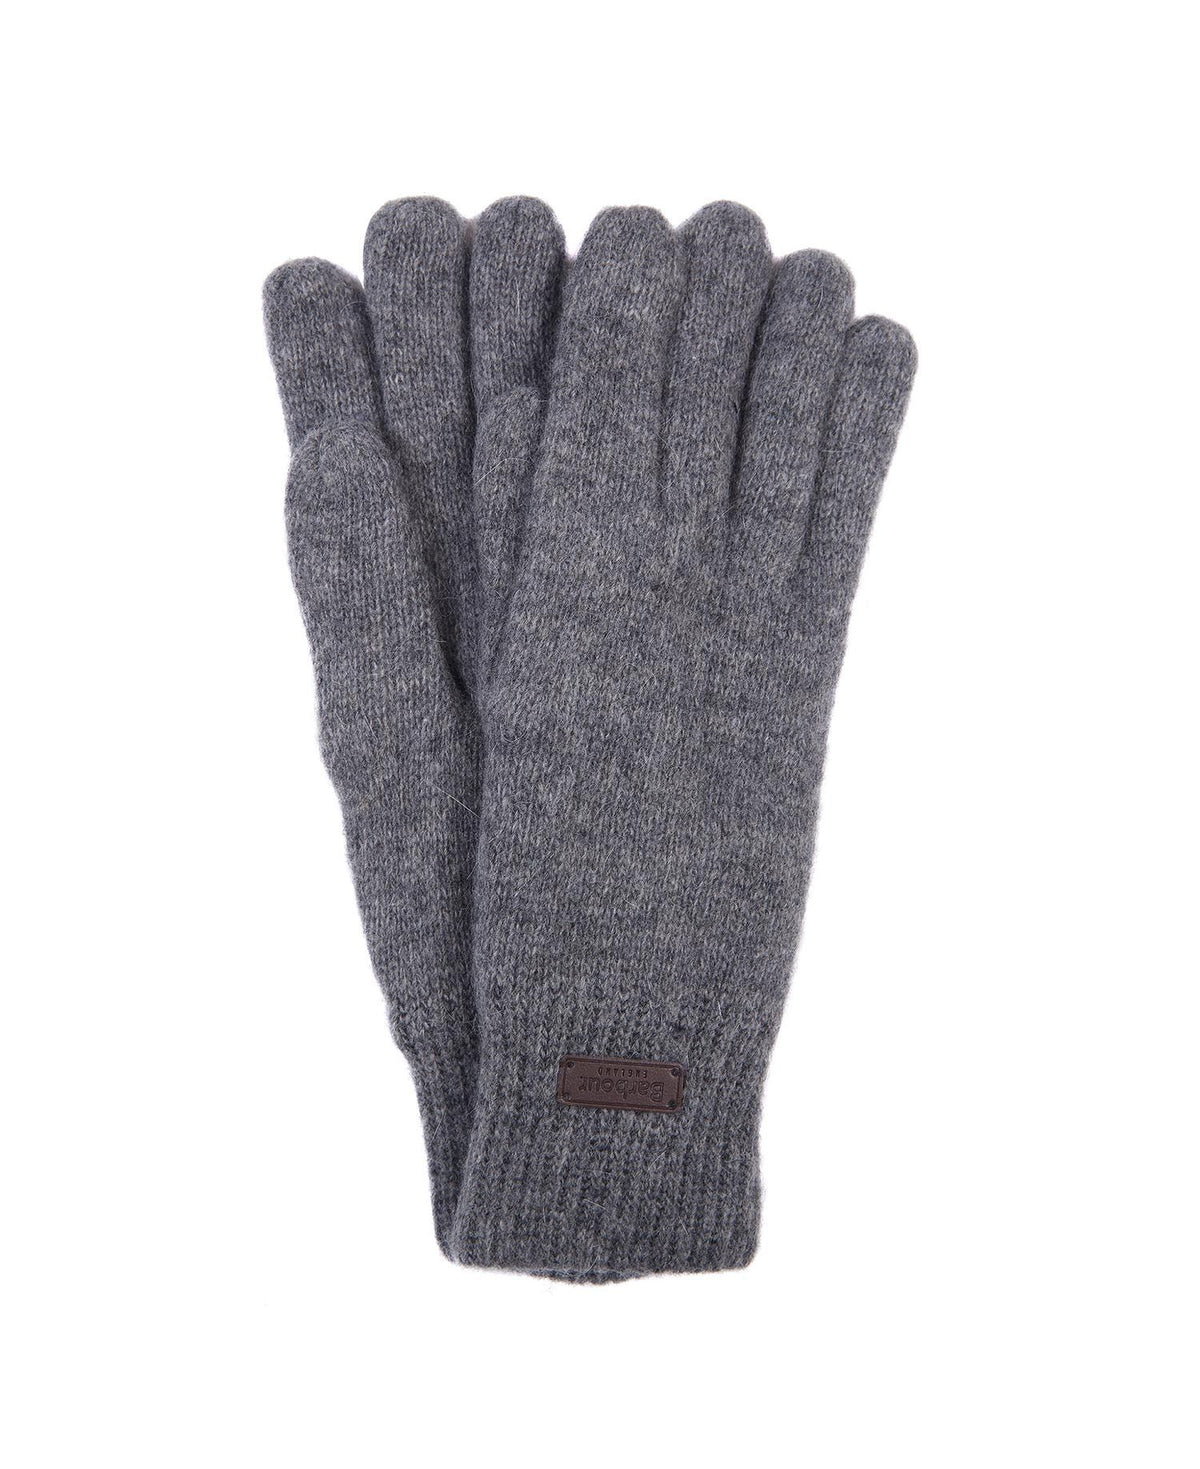 Barbour Mens 'Carlton' Knitted Gloves, 03, Mgl0065, Grey